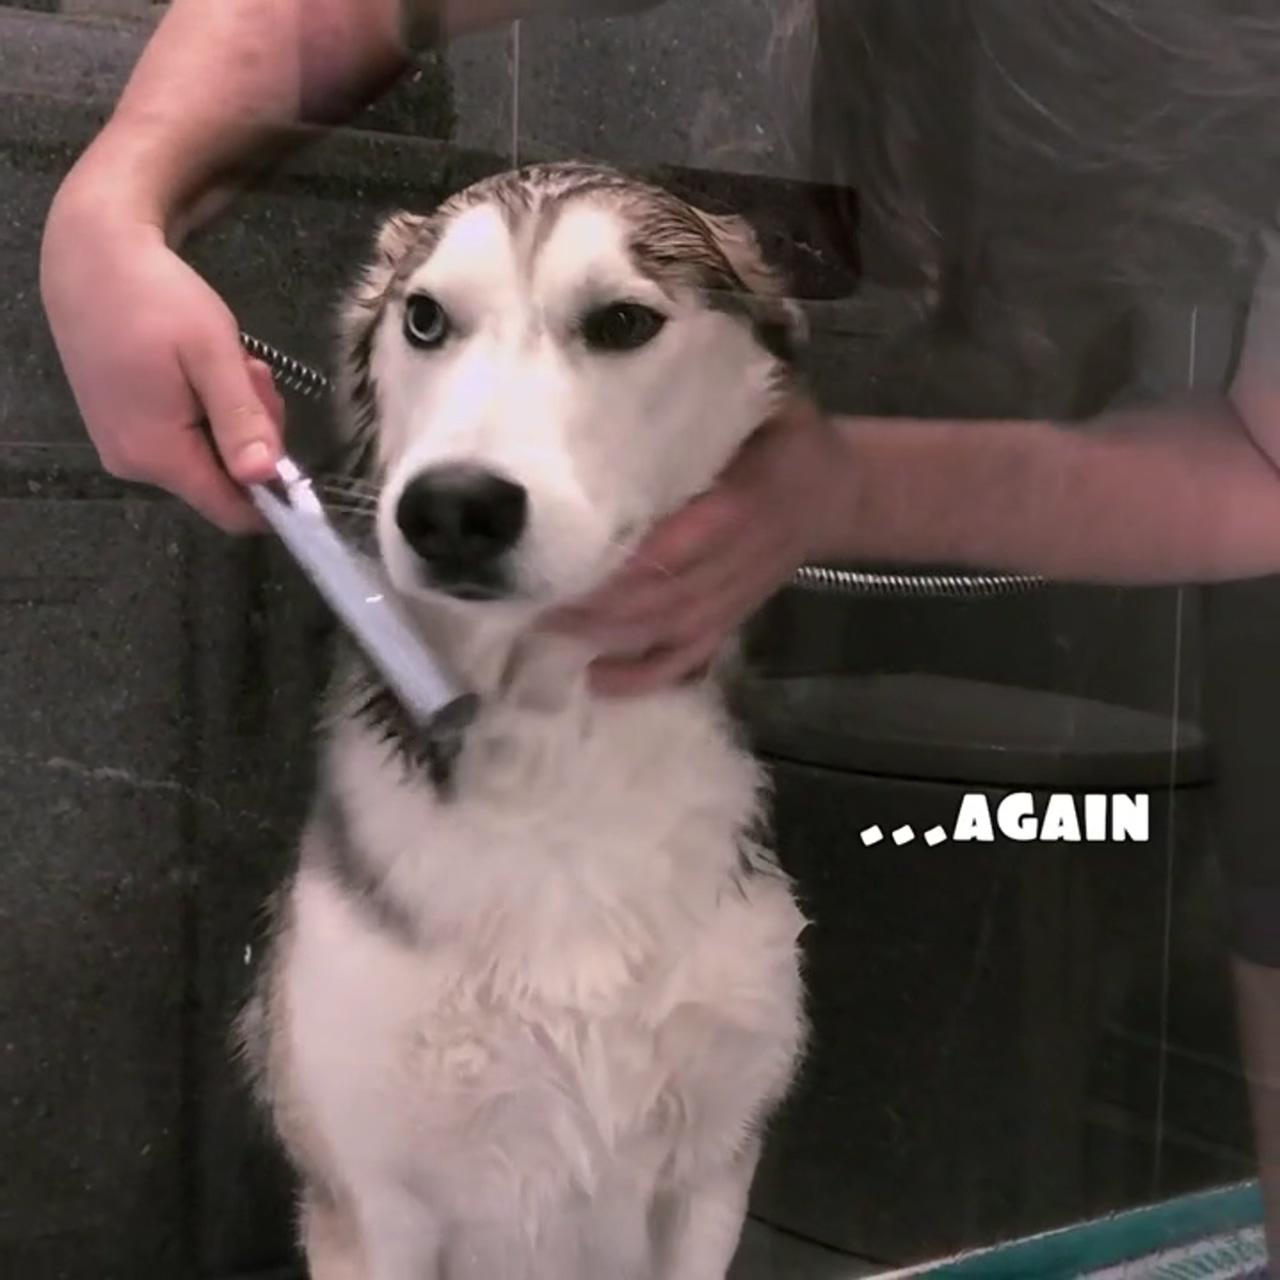 The husky sugar trap how to make bath time fun for dogs; cute baby dogs